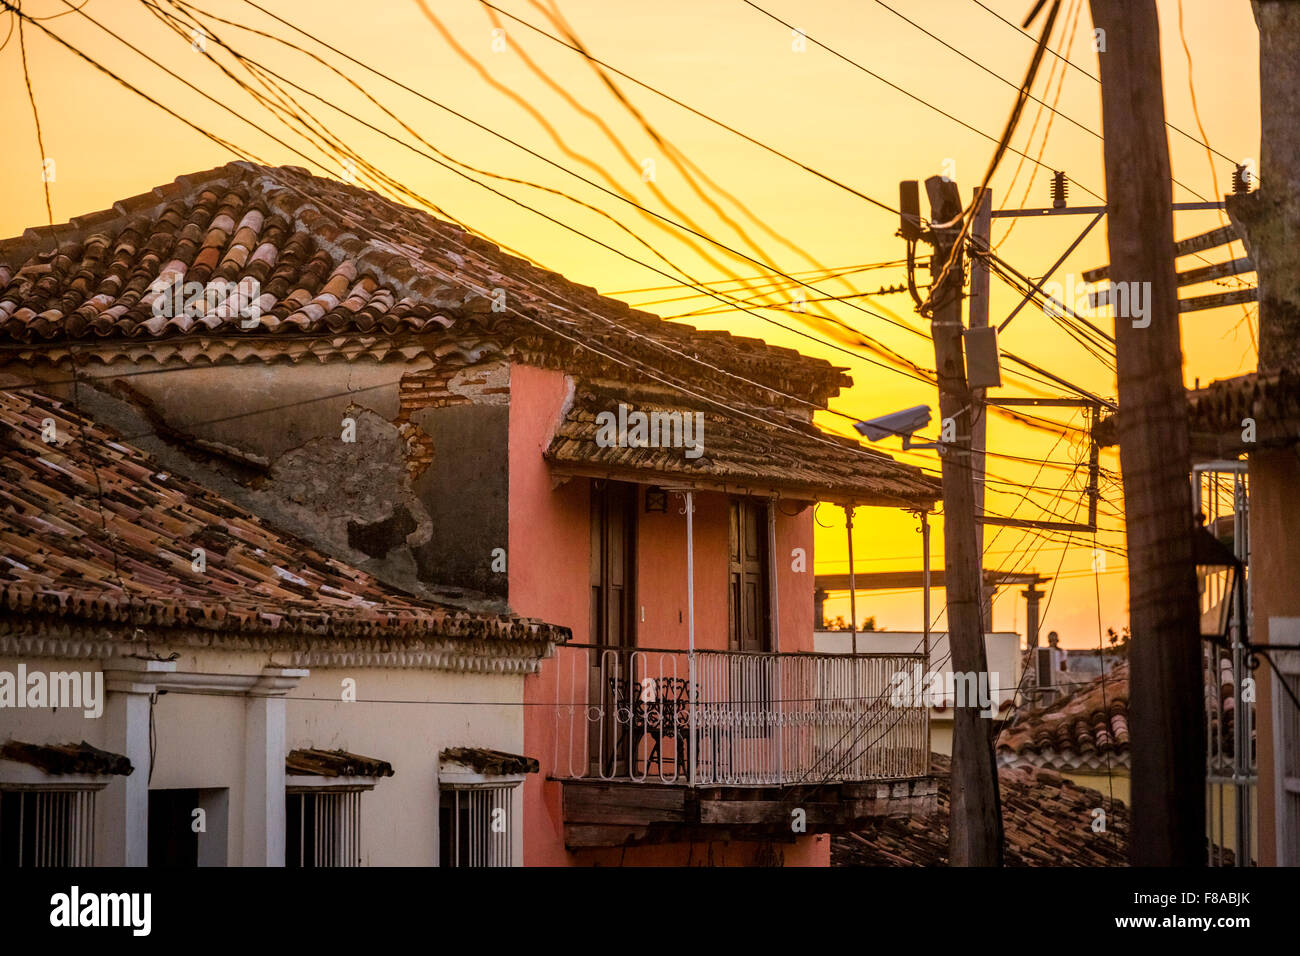 Trinidad, power lines, cable chaos chaotic electrical installations, street life, street scene with overhead electrical cables, Stock Photo